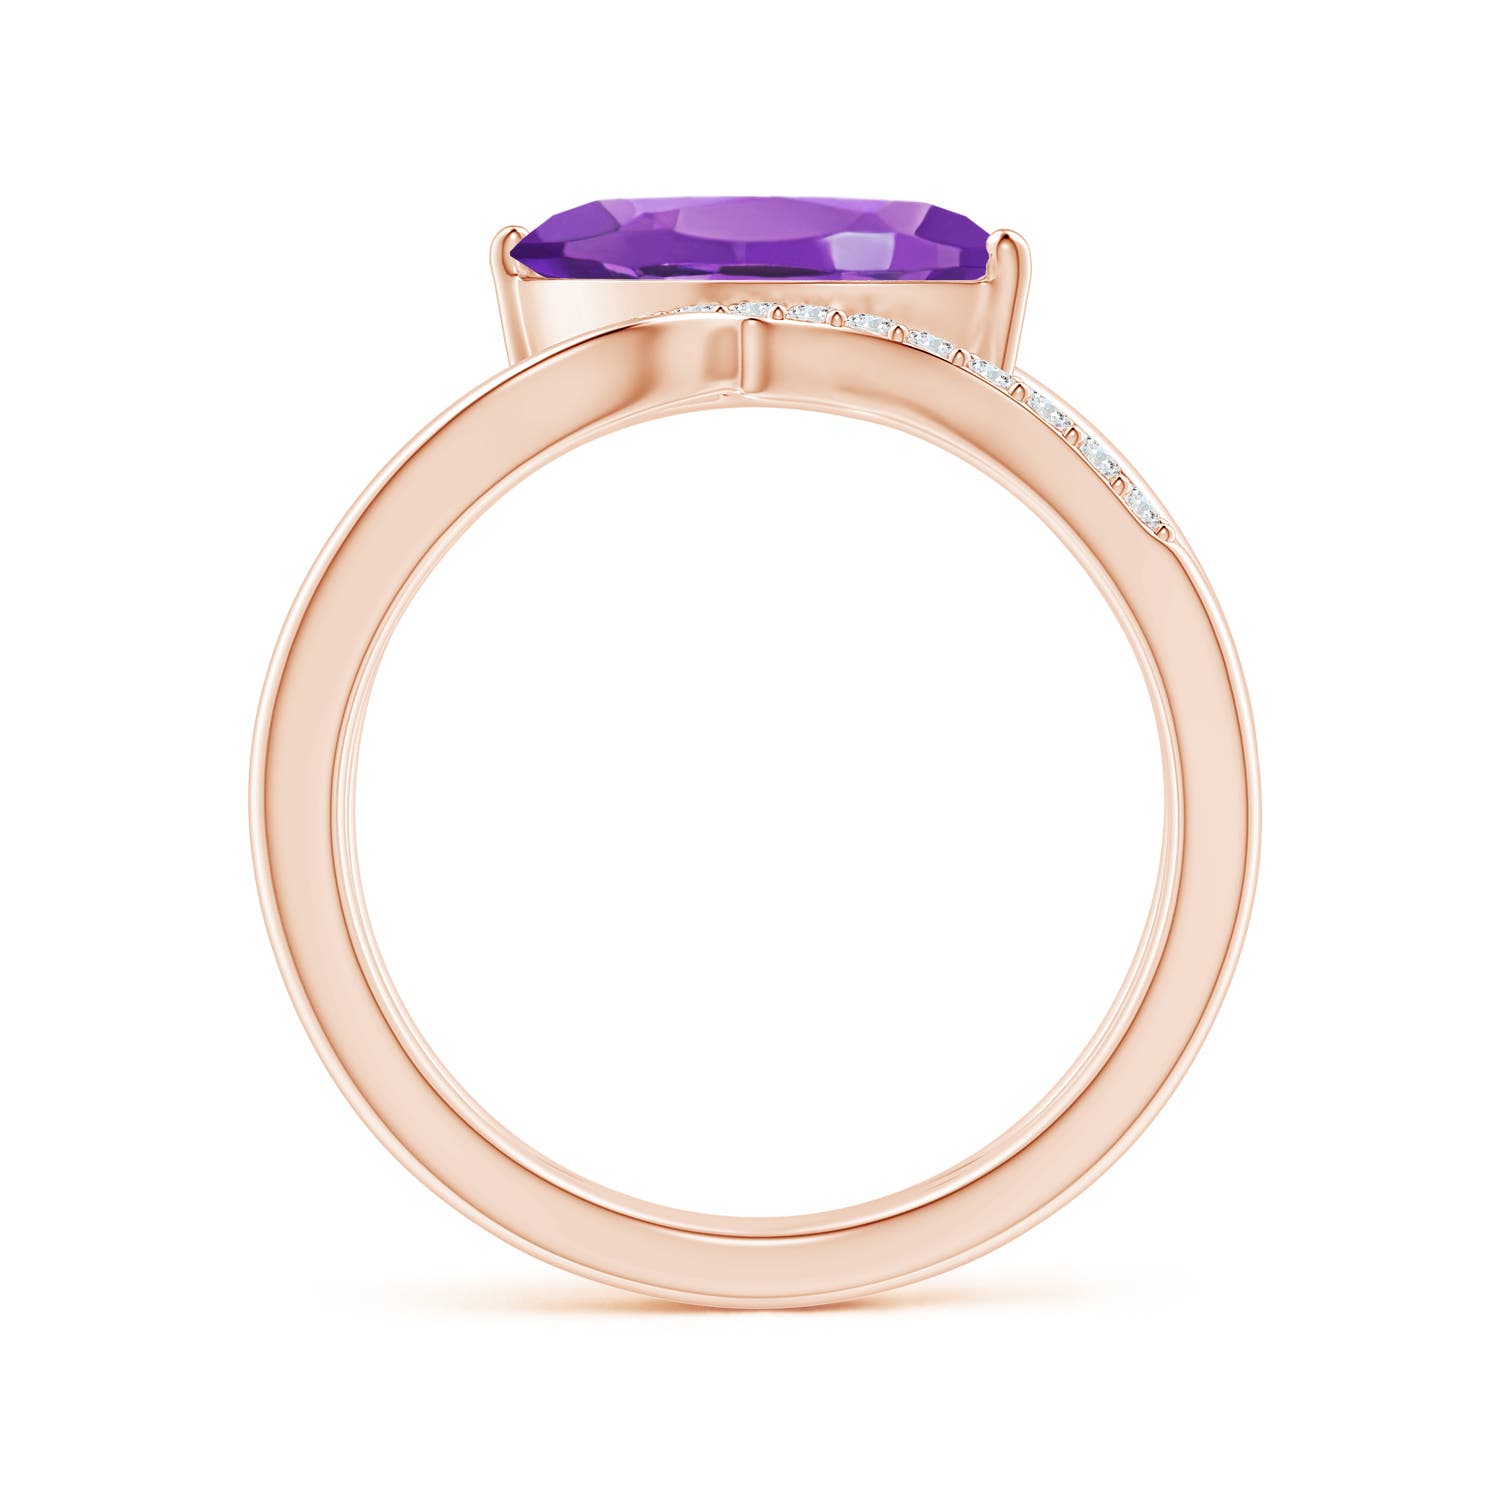 AAA - Amethyst / 1.54 CT / 14 KT Rose Gold